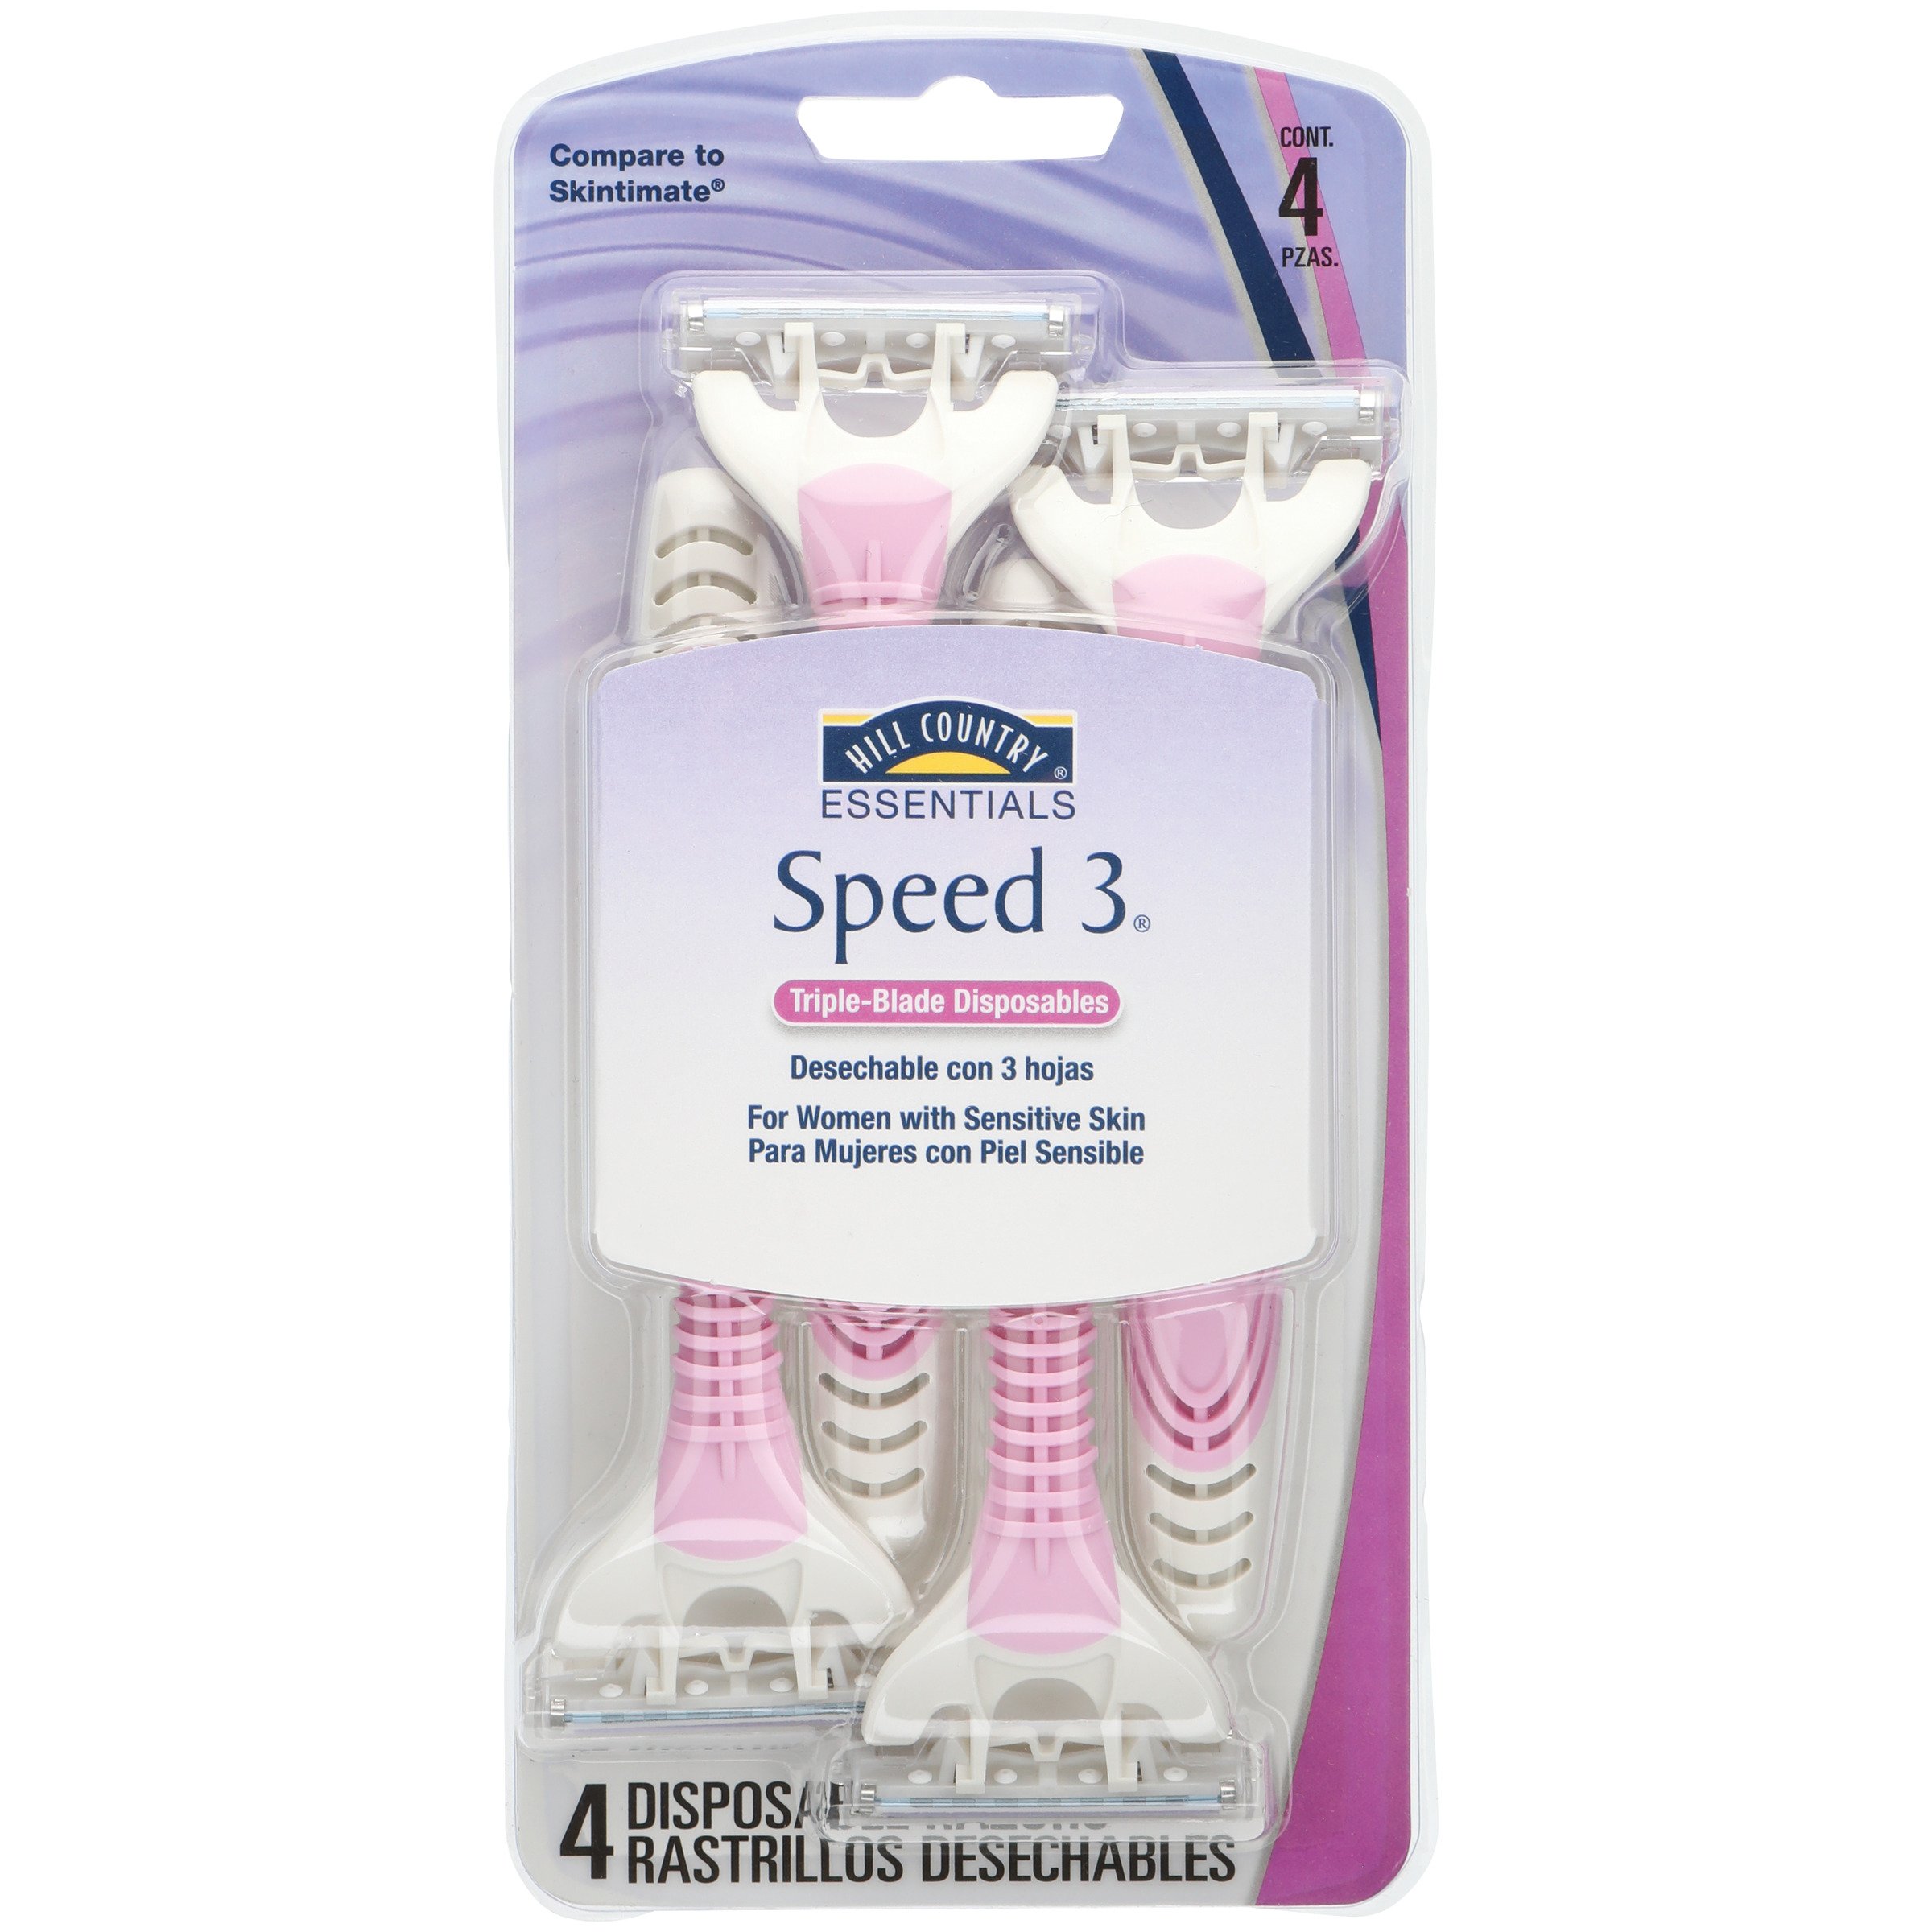 Hill Country Essentials Simply Silky 4 Women's Disposable Razors